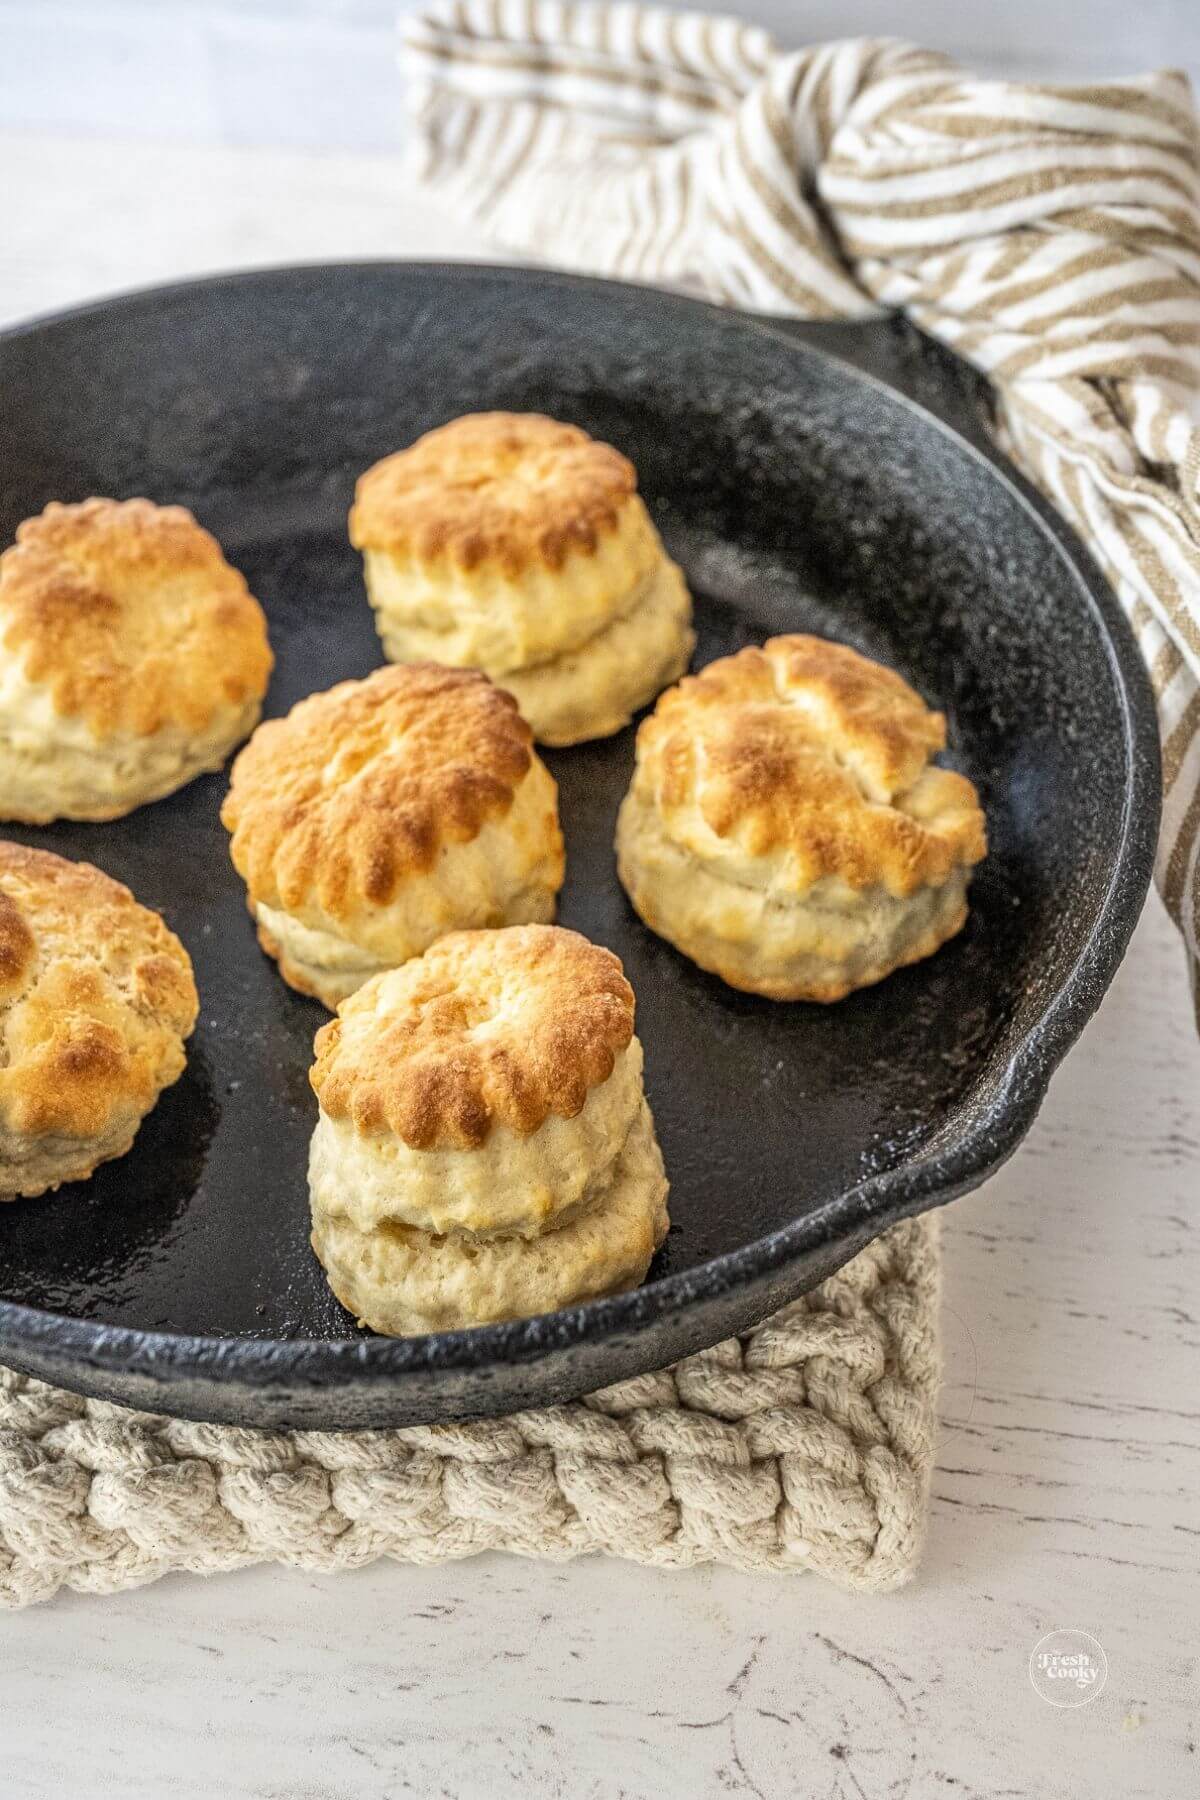 Biscuits baked in cast iron skillet.